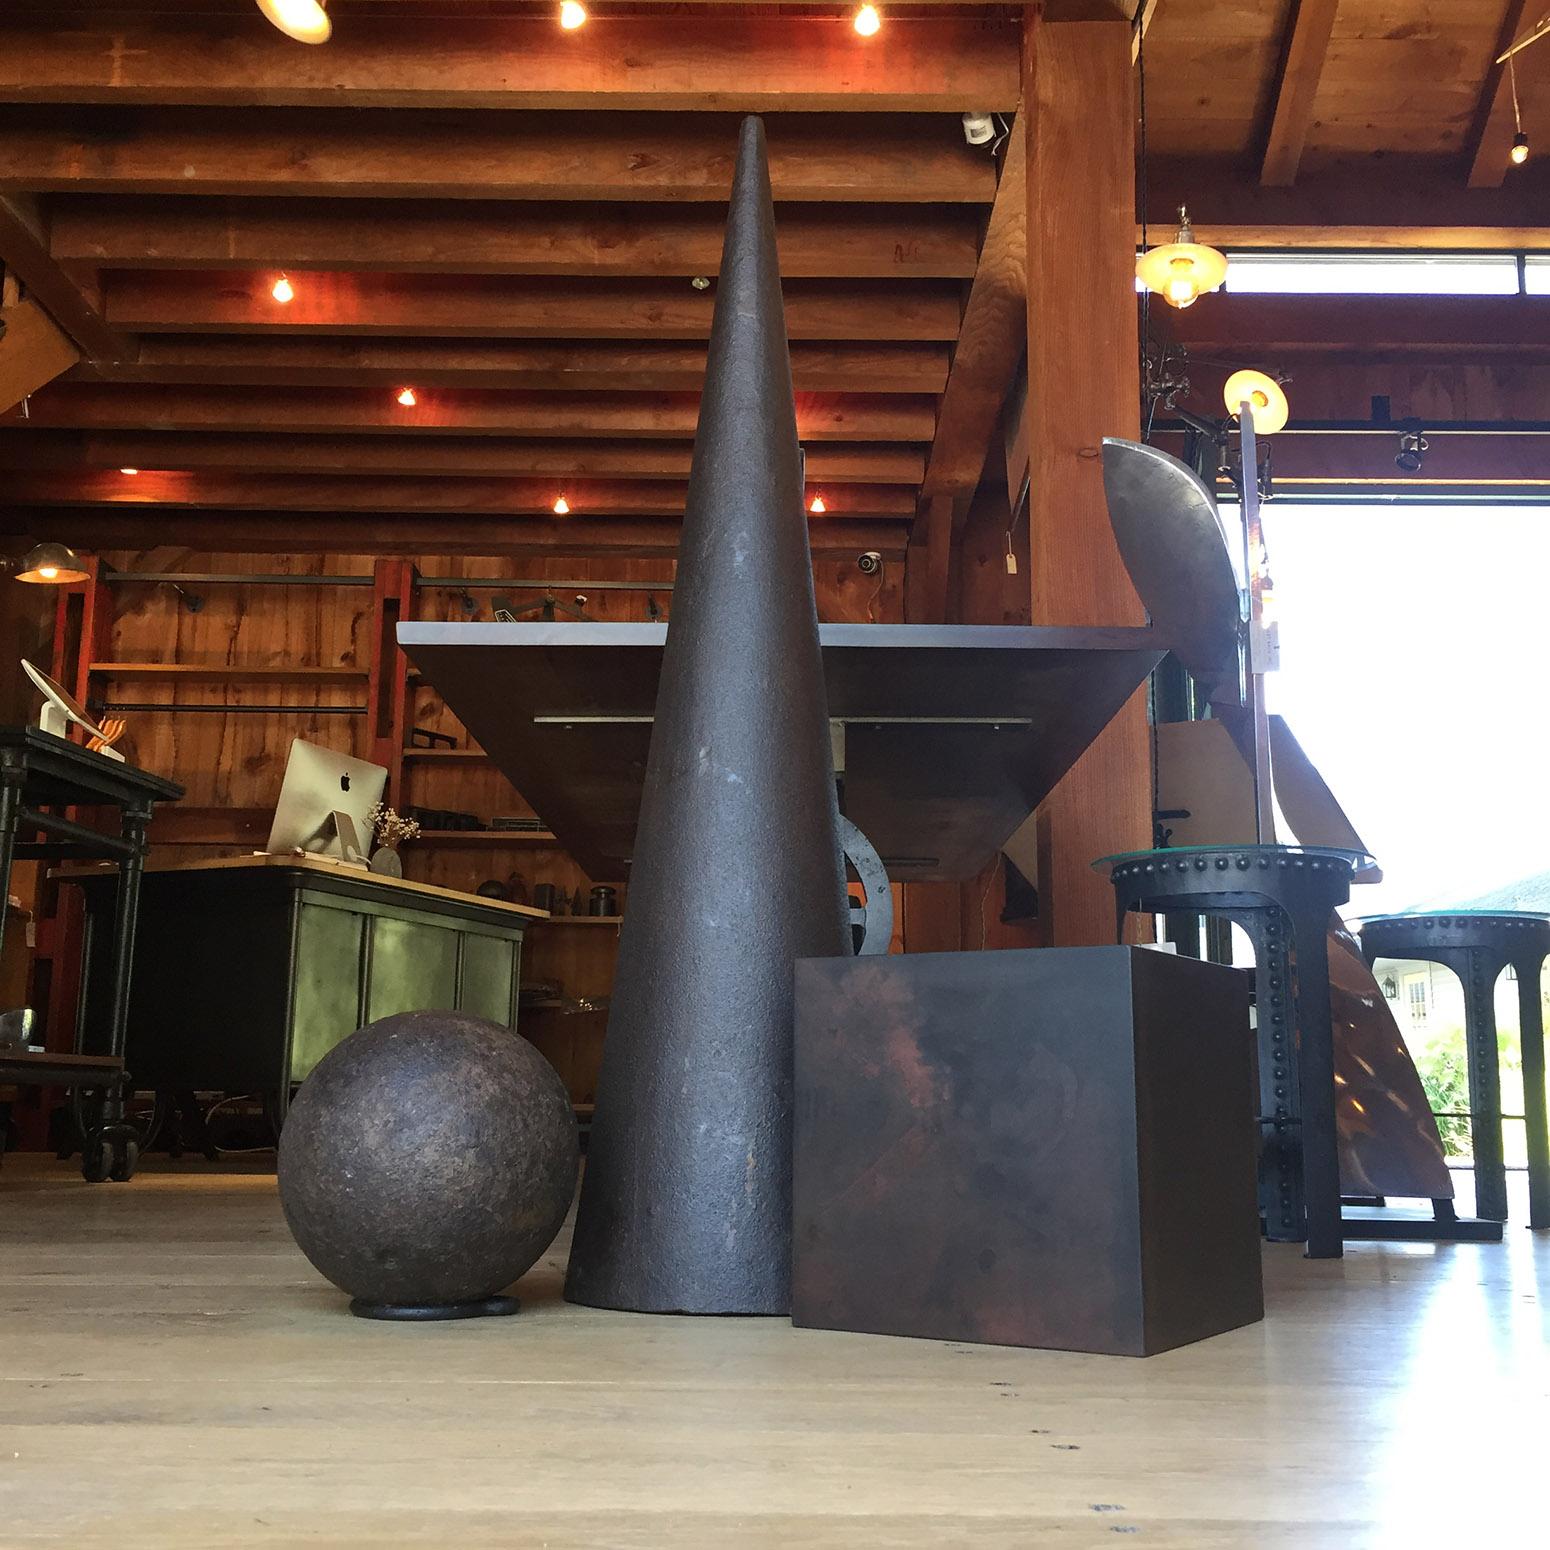 Industrial iconic art installation geometric shapes. Cone is an antique solid ductile cast iron blacksmith's mandrel - 48 1/4